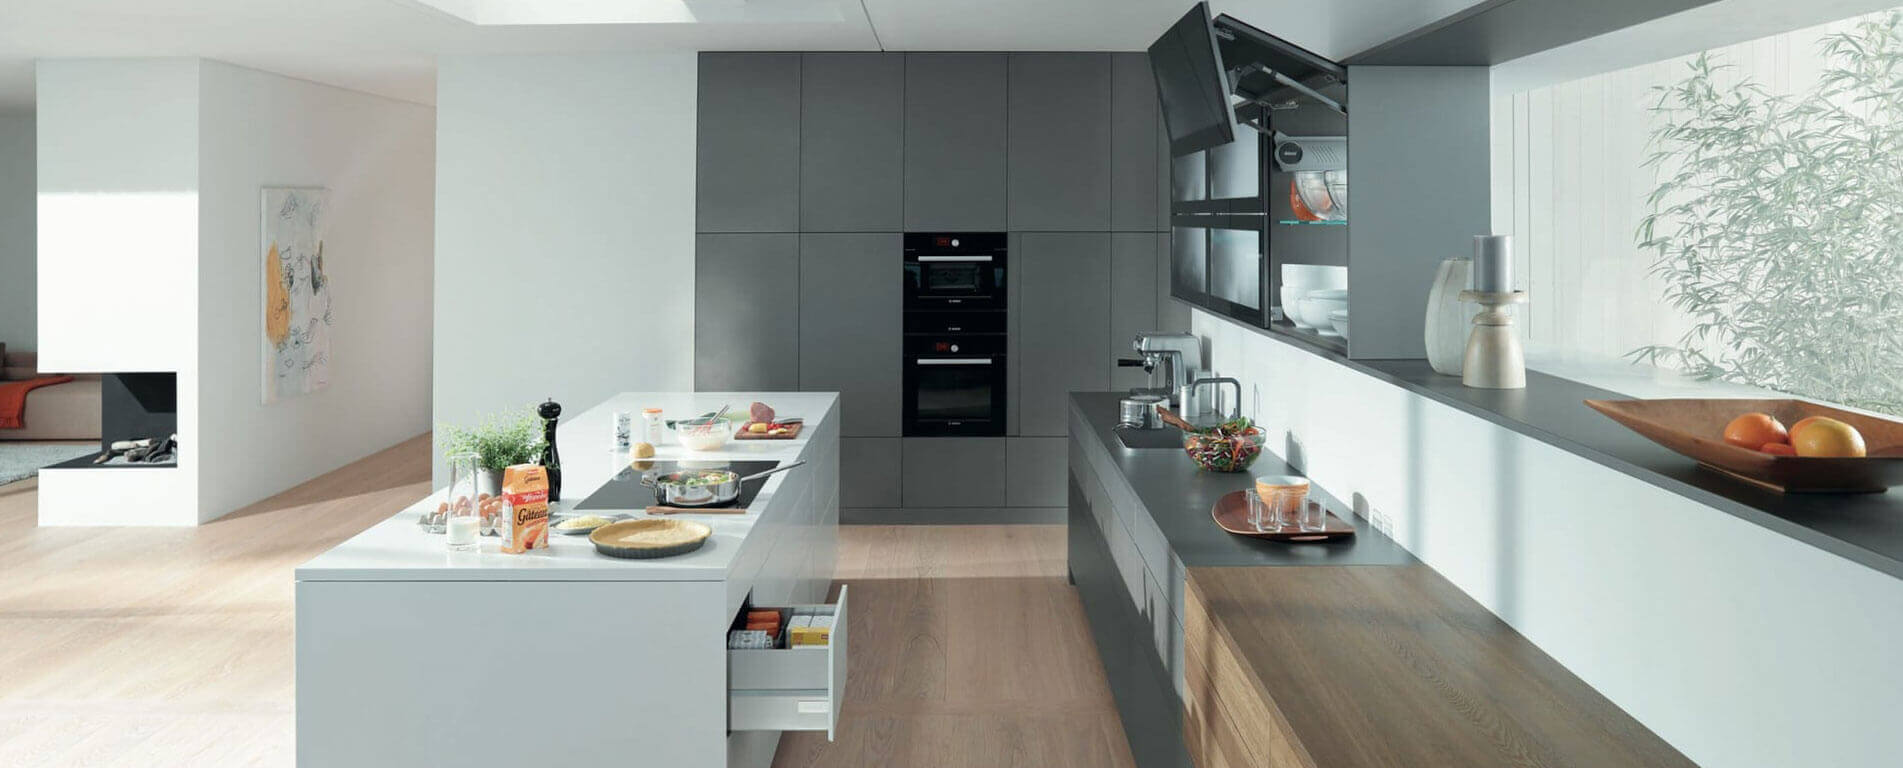 The Necessity of Modular Kitchen Furniture in a Contemporary Home